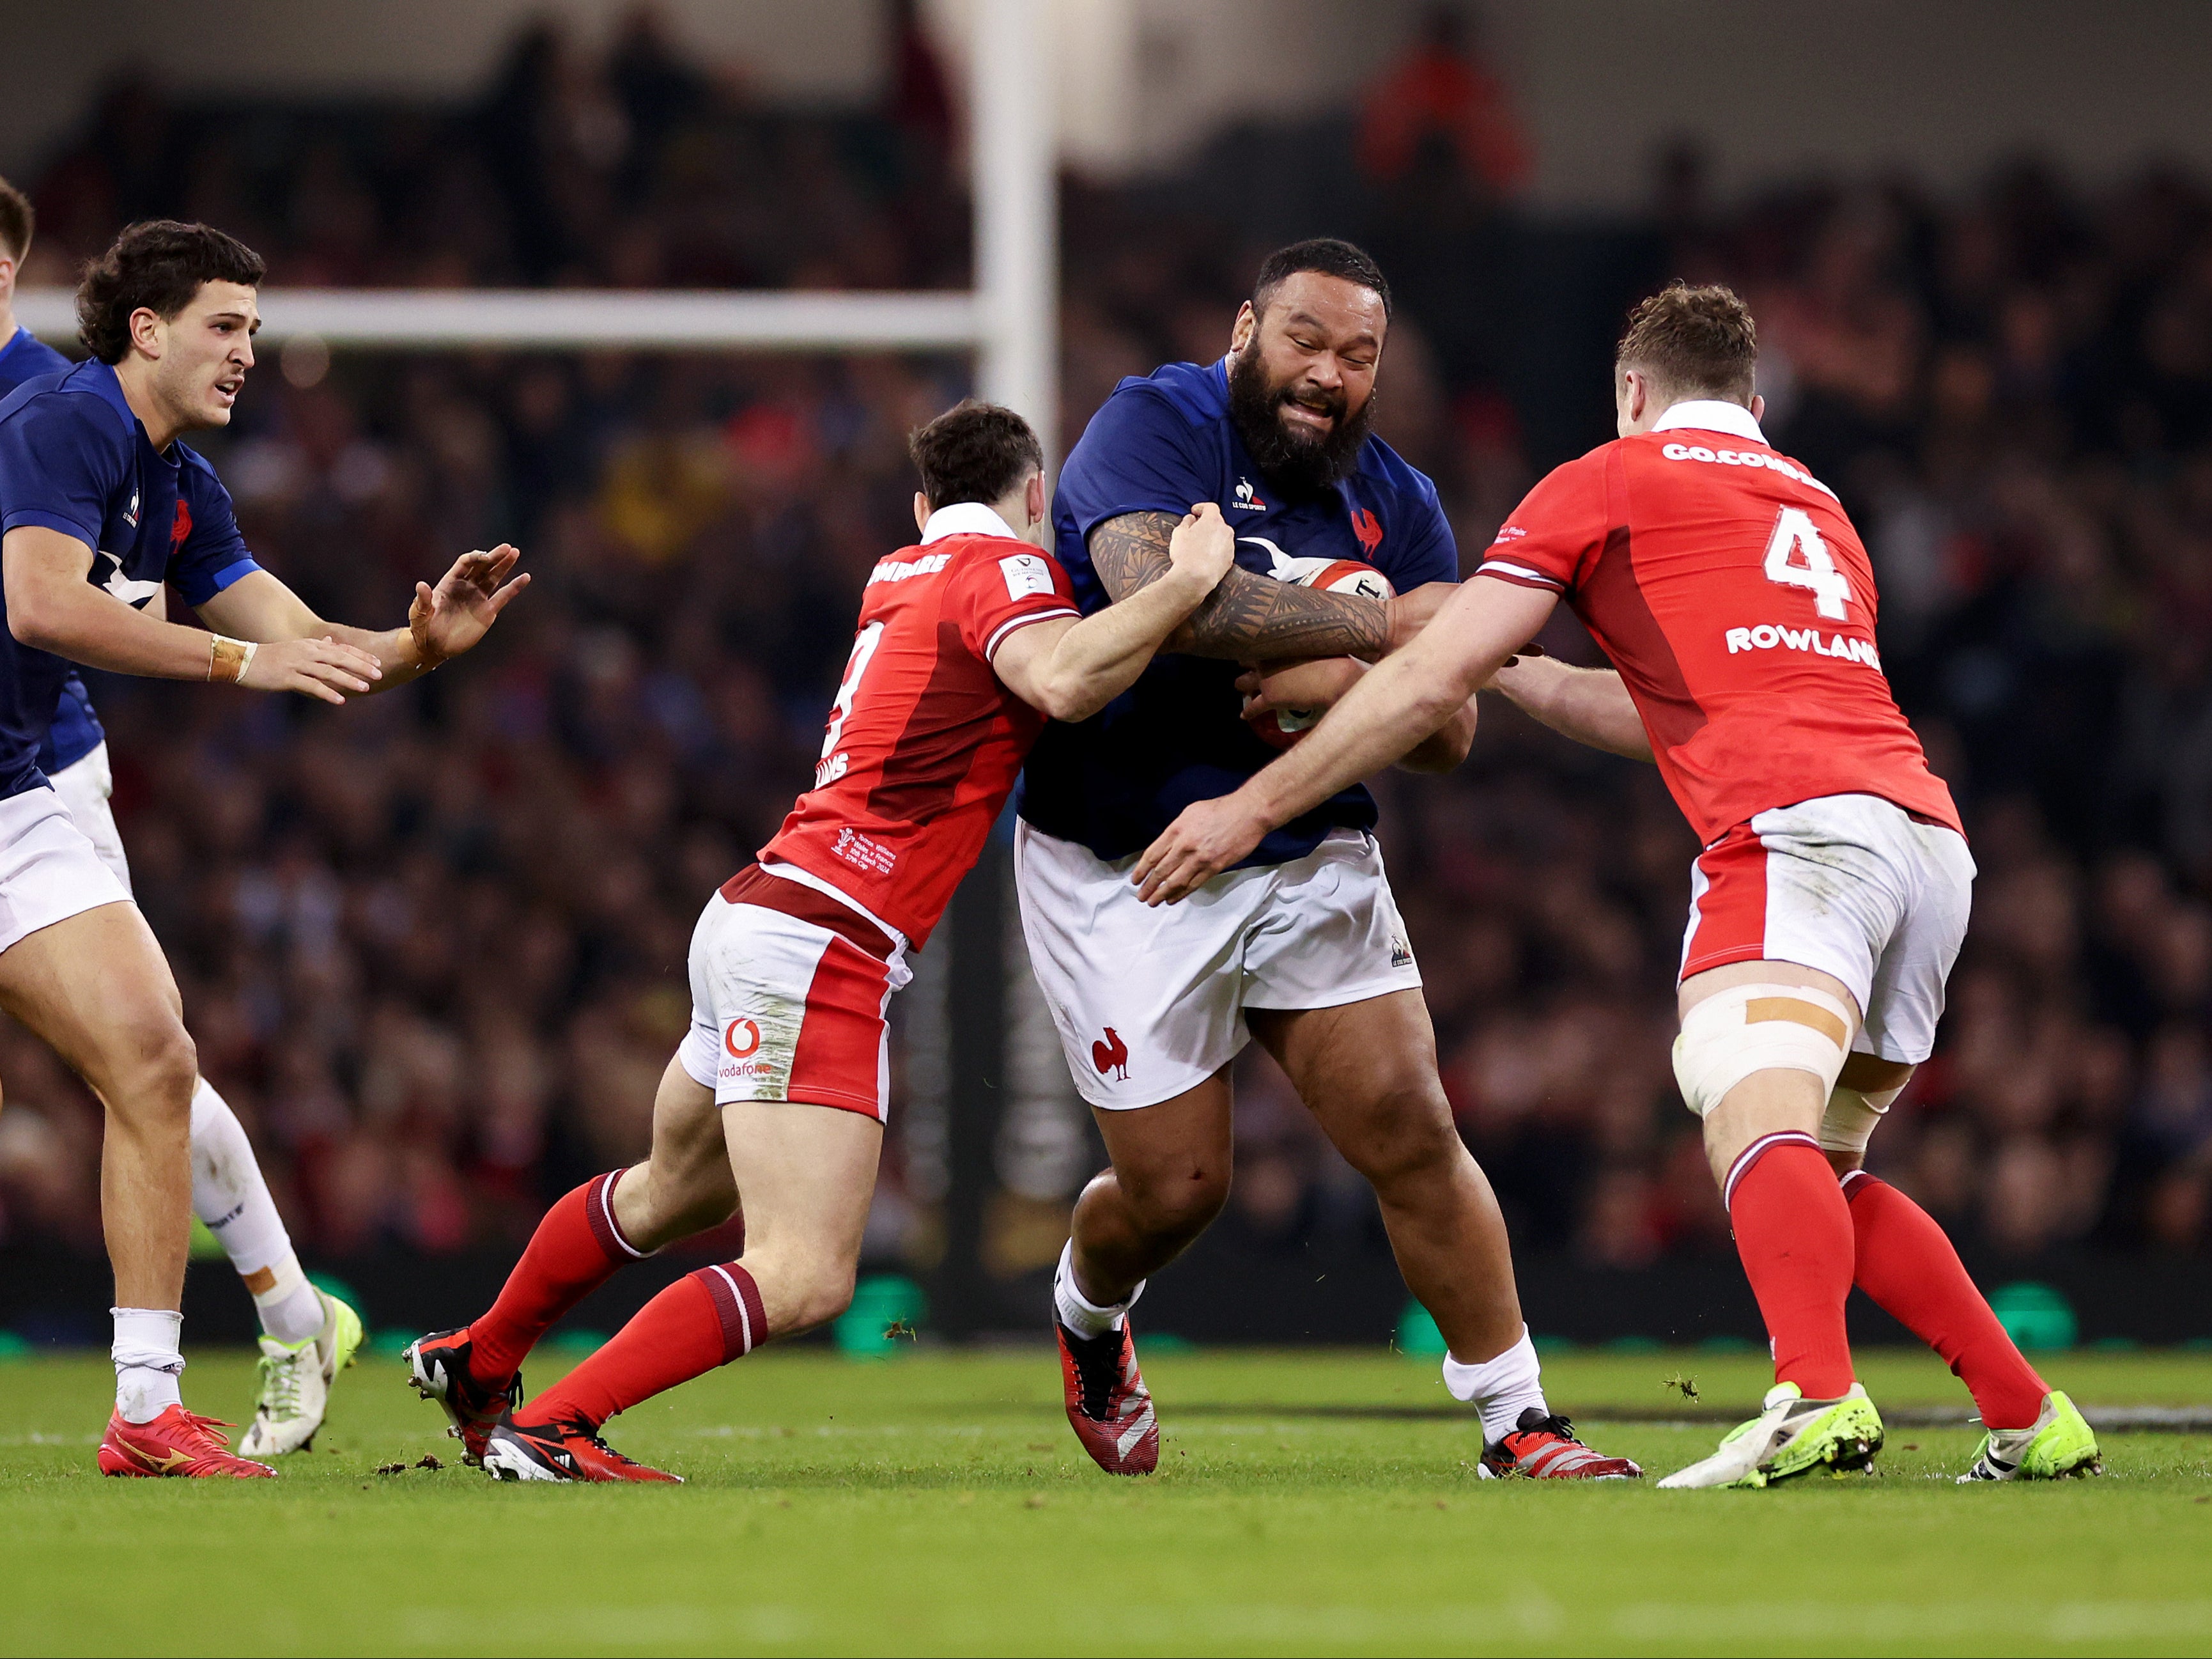 France’s forward megafauna did the damage to quell a spirited Wales